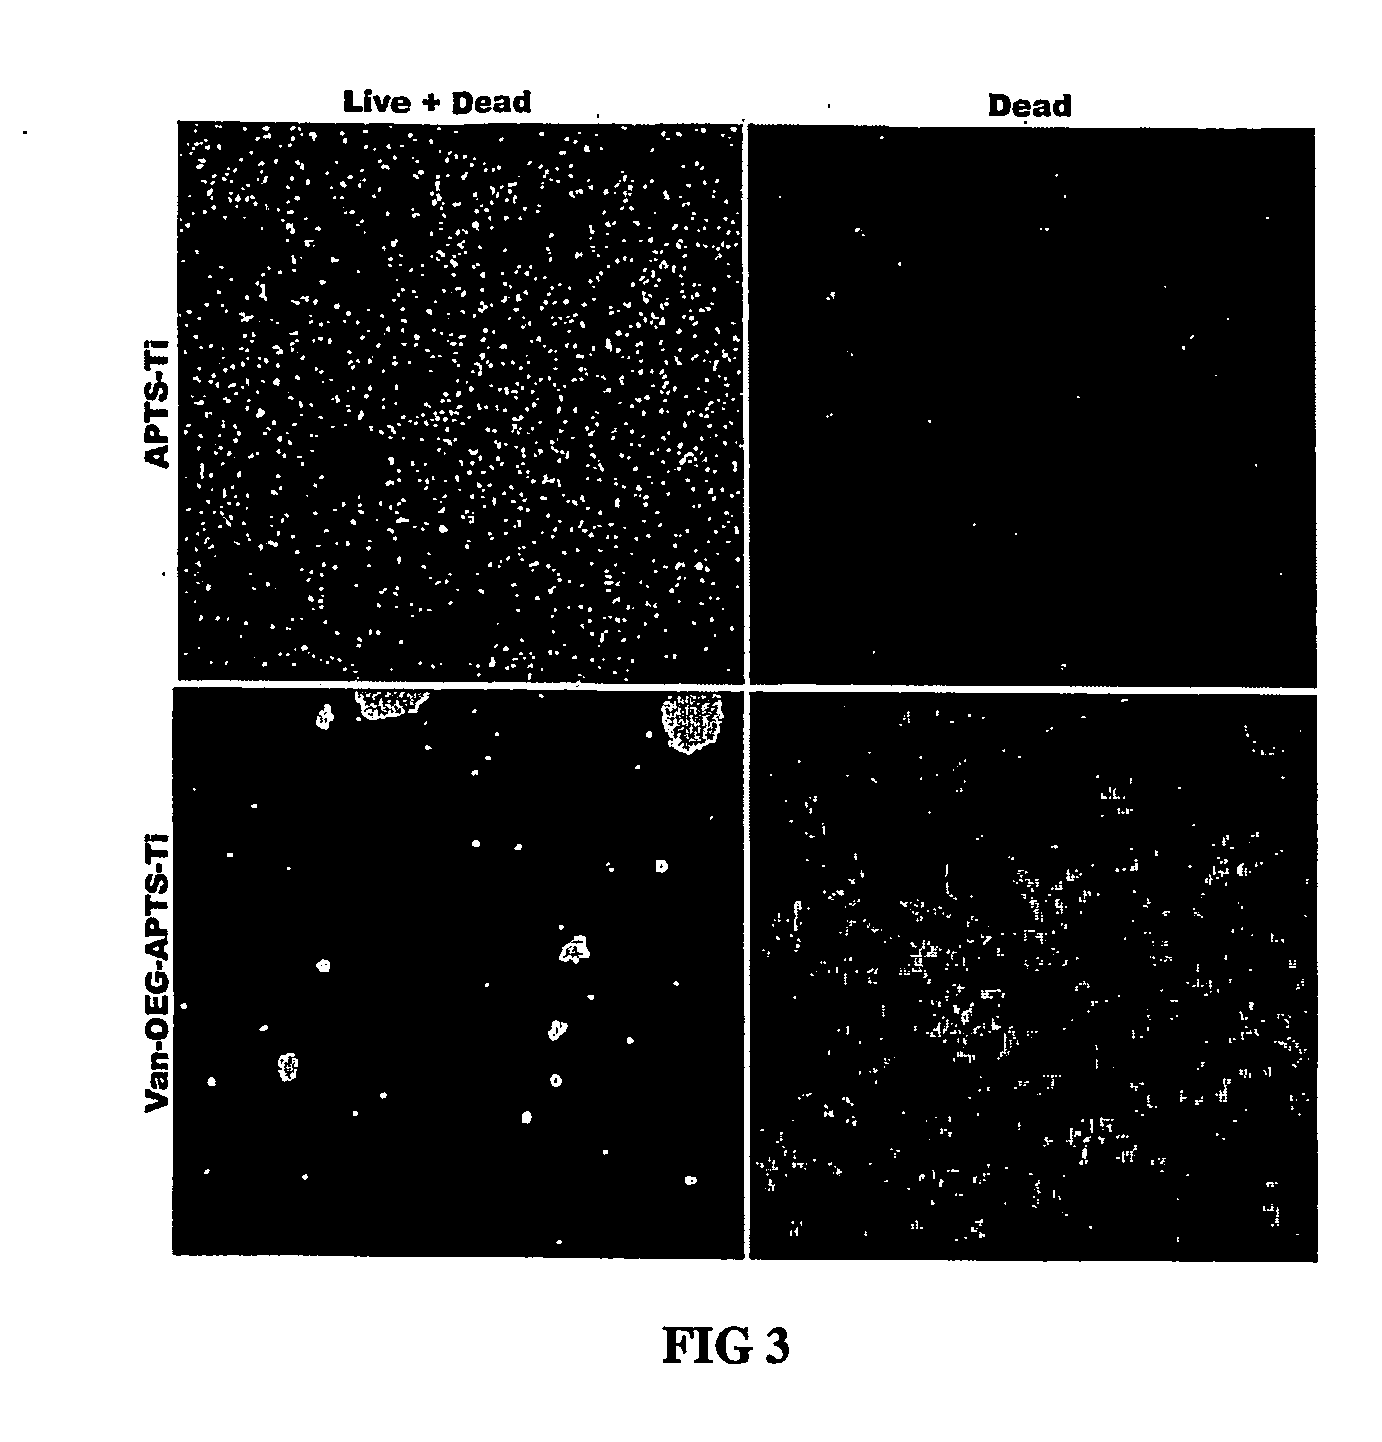 Implants with attached silylated therapeutic agents